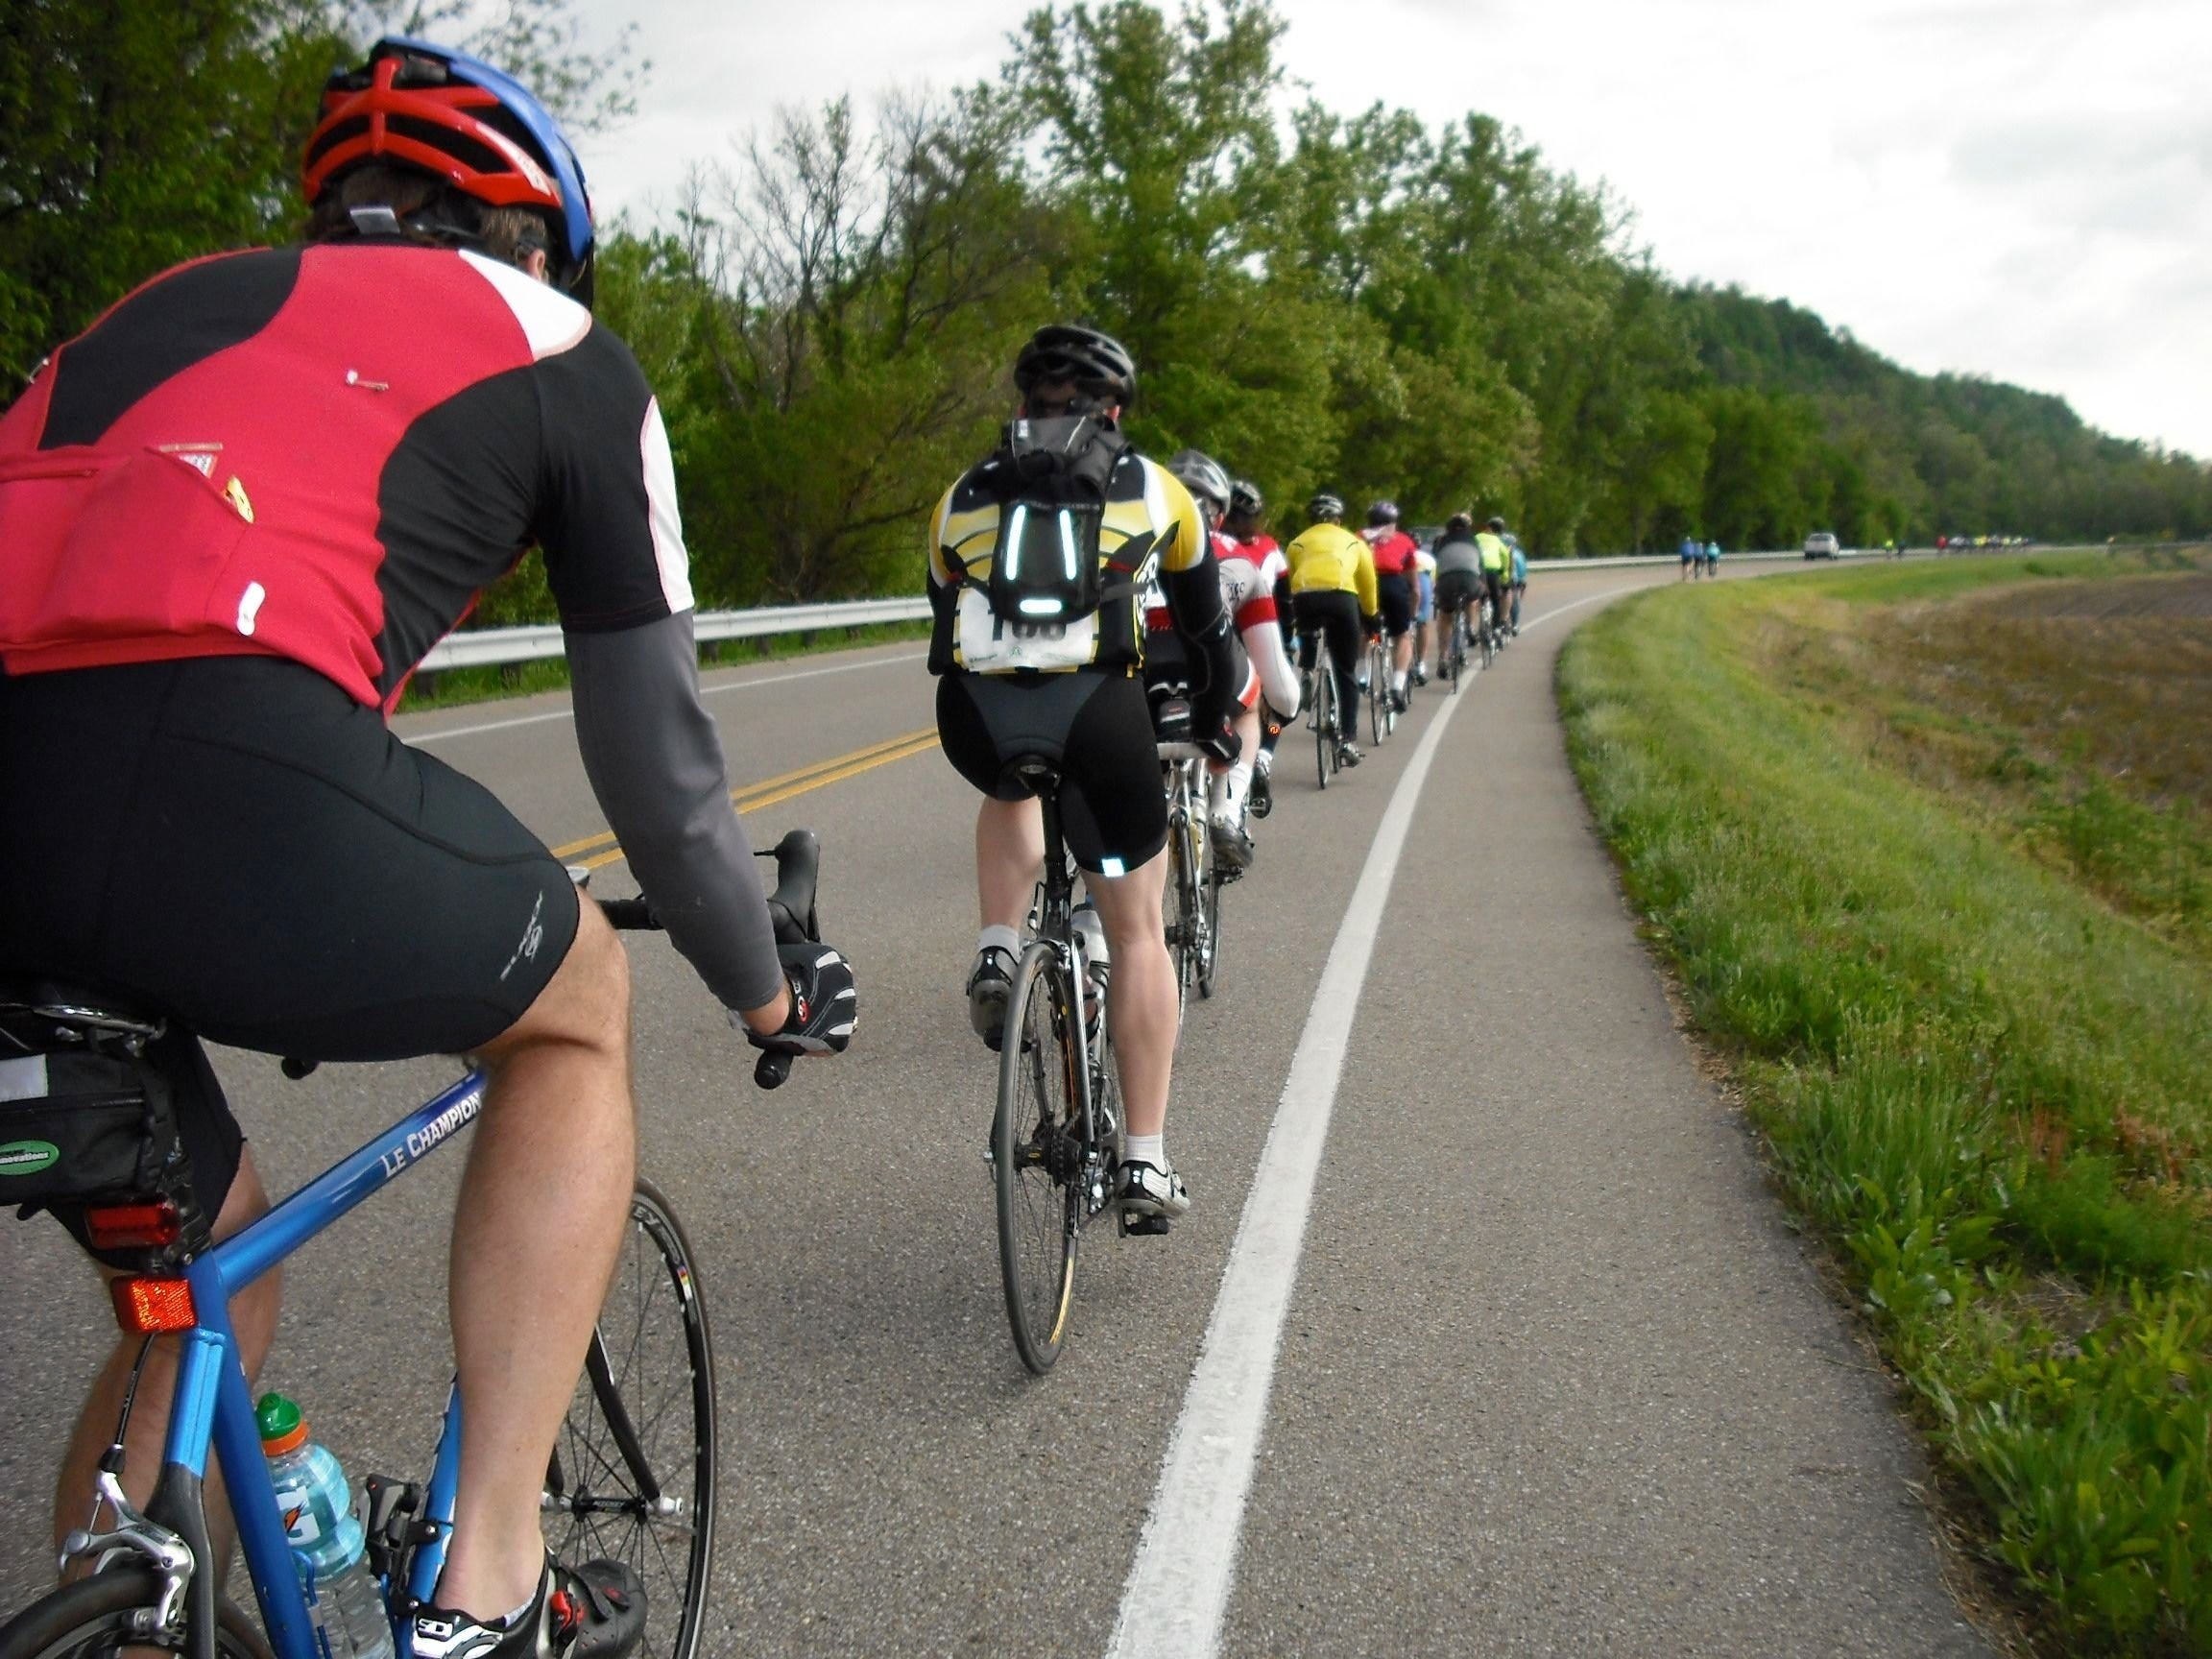 Outdoor Pursuits sponsors the Tour of the Scioto River Valley, also known as TOSRV.